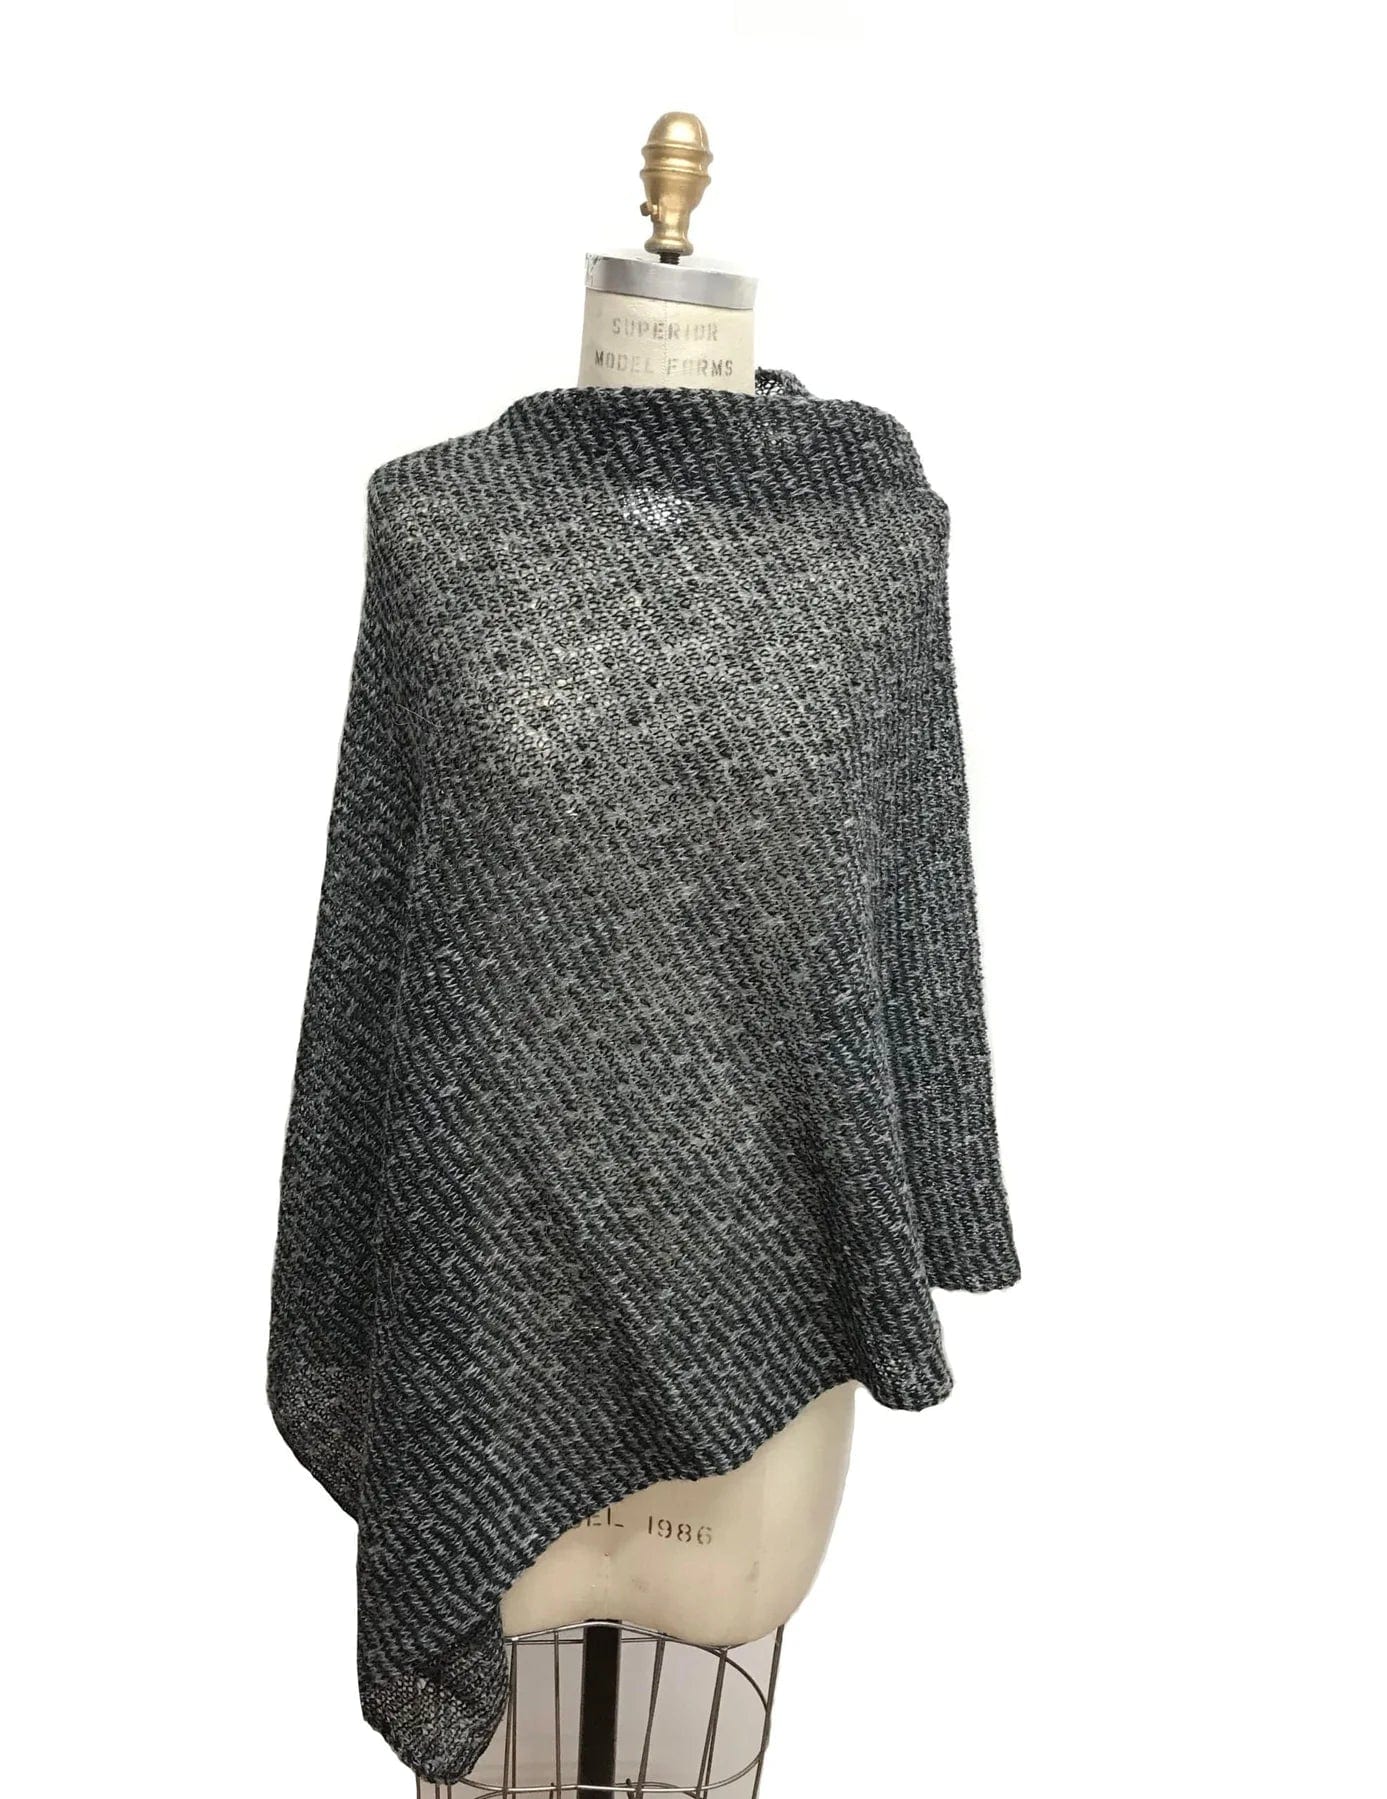 Light Wool Poncho - Beige and White - The Icelandic Store